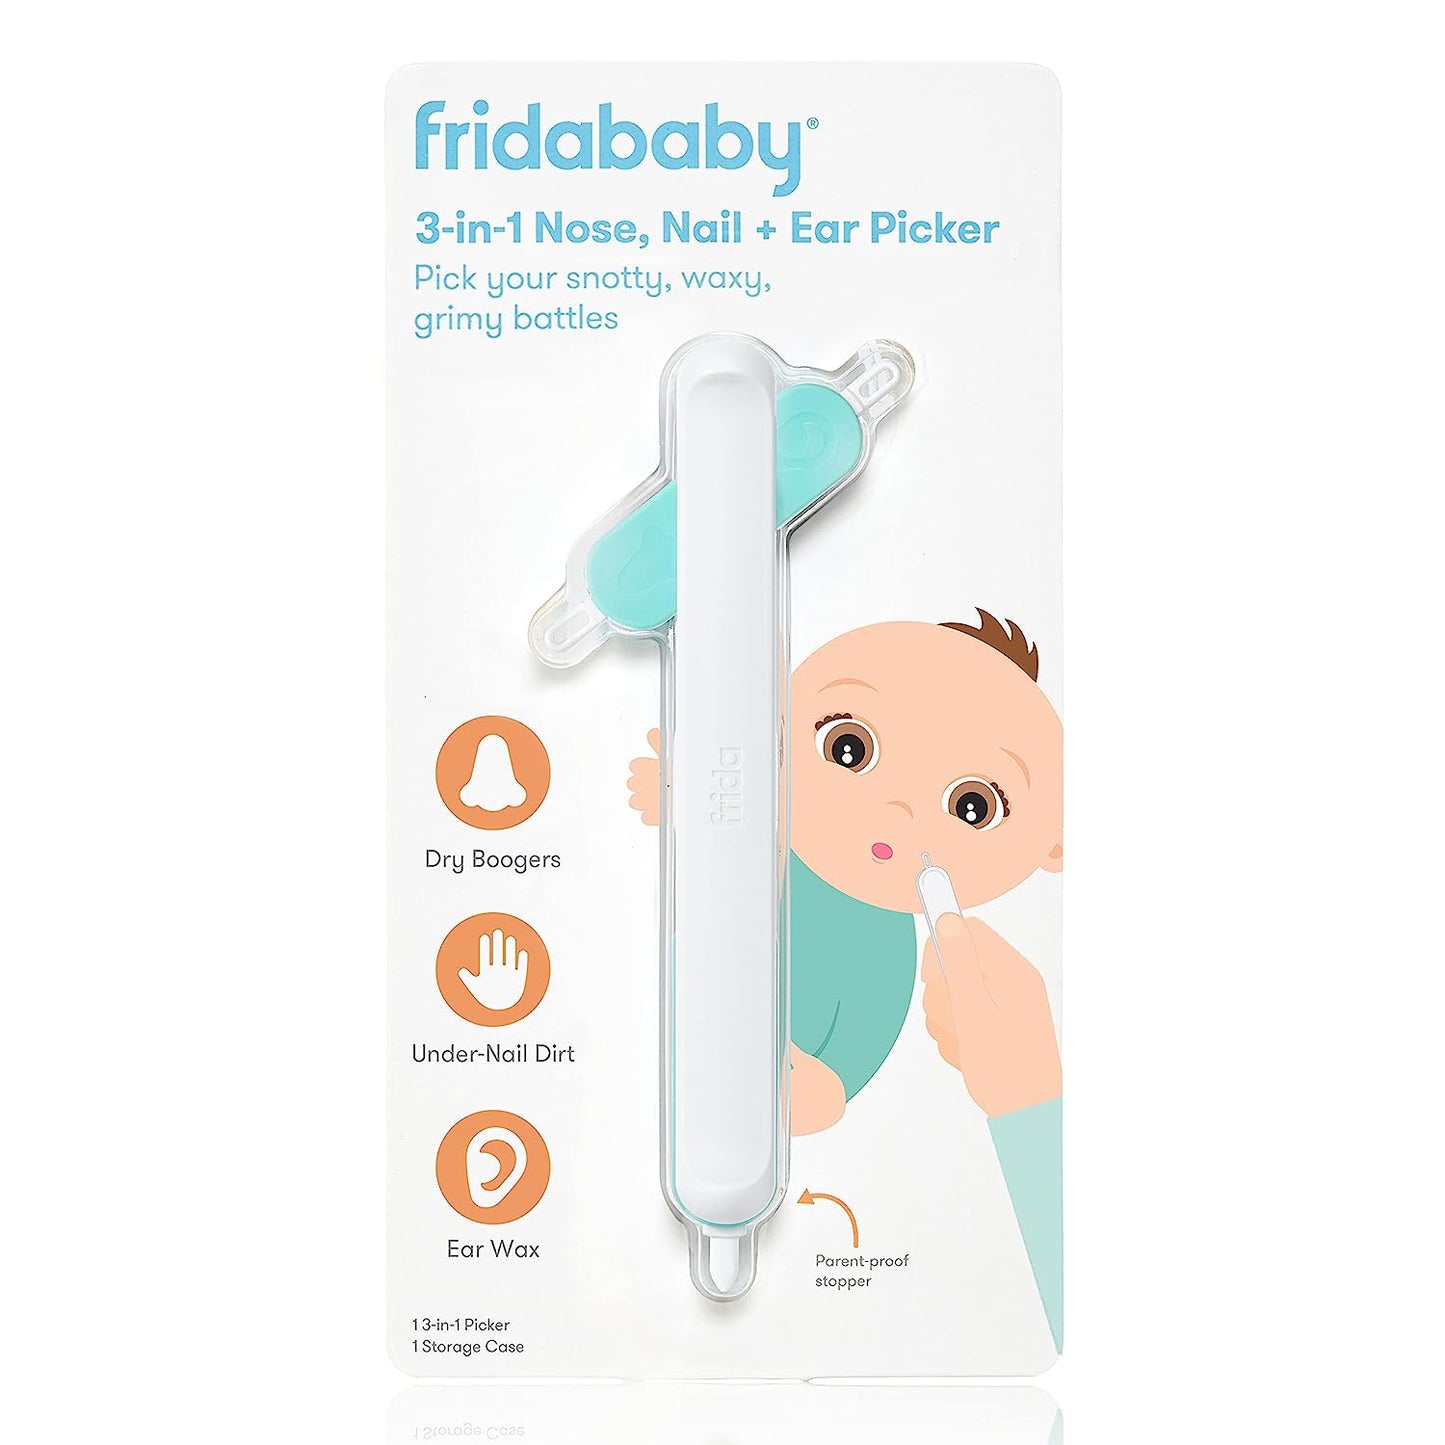 Frida 3-in-1 Nose, Nail, and Ear Picker